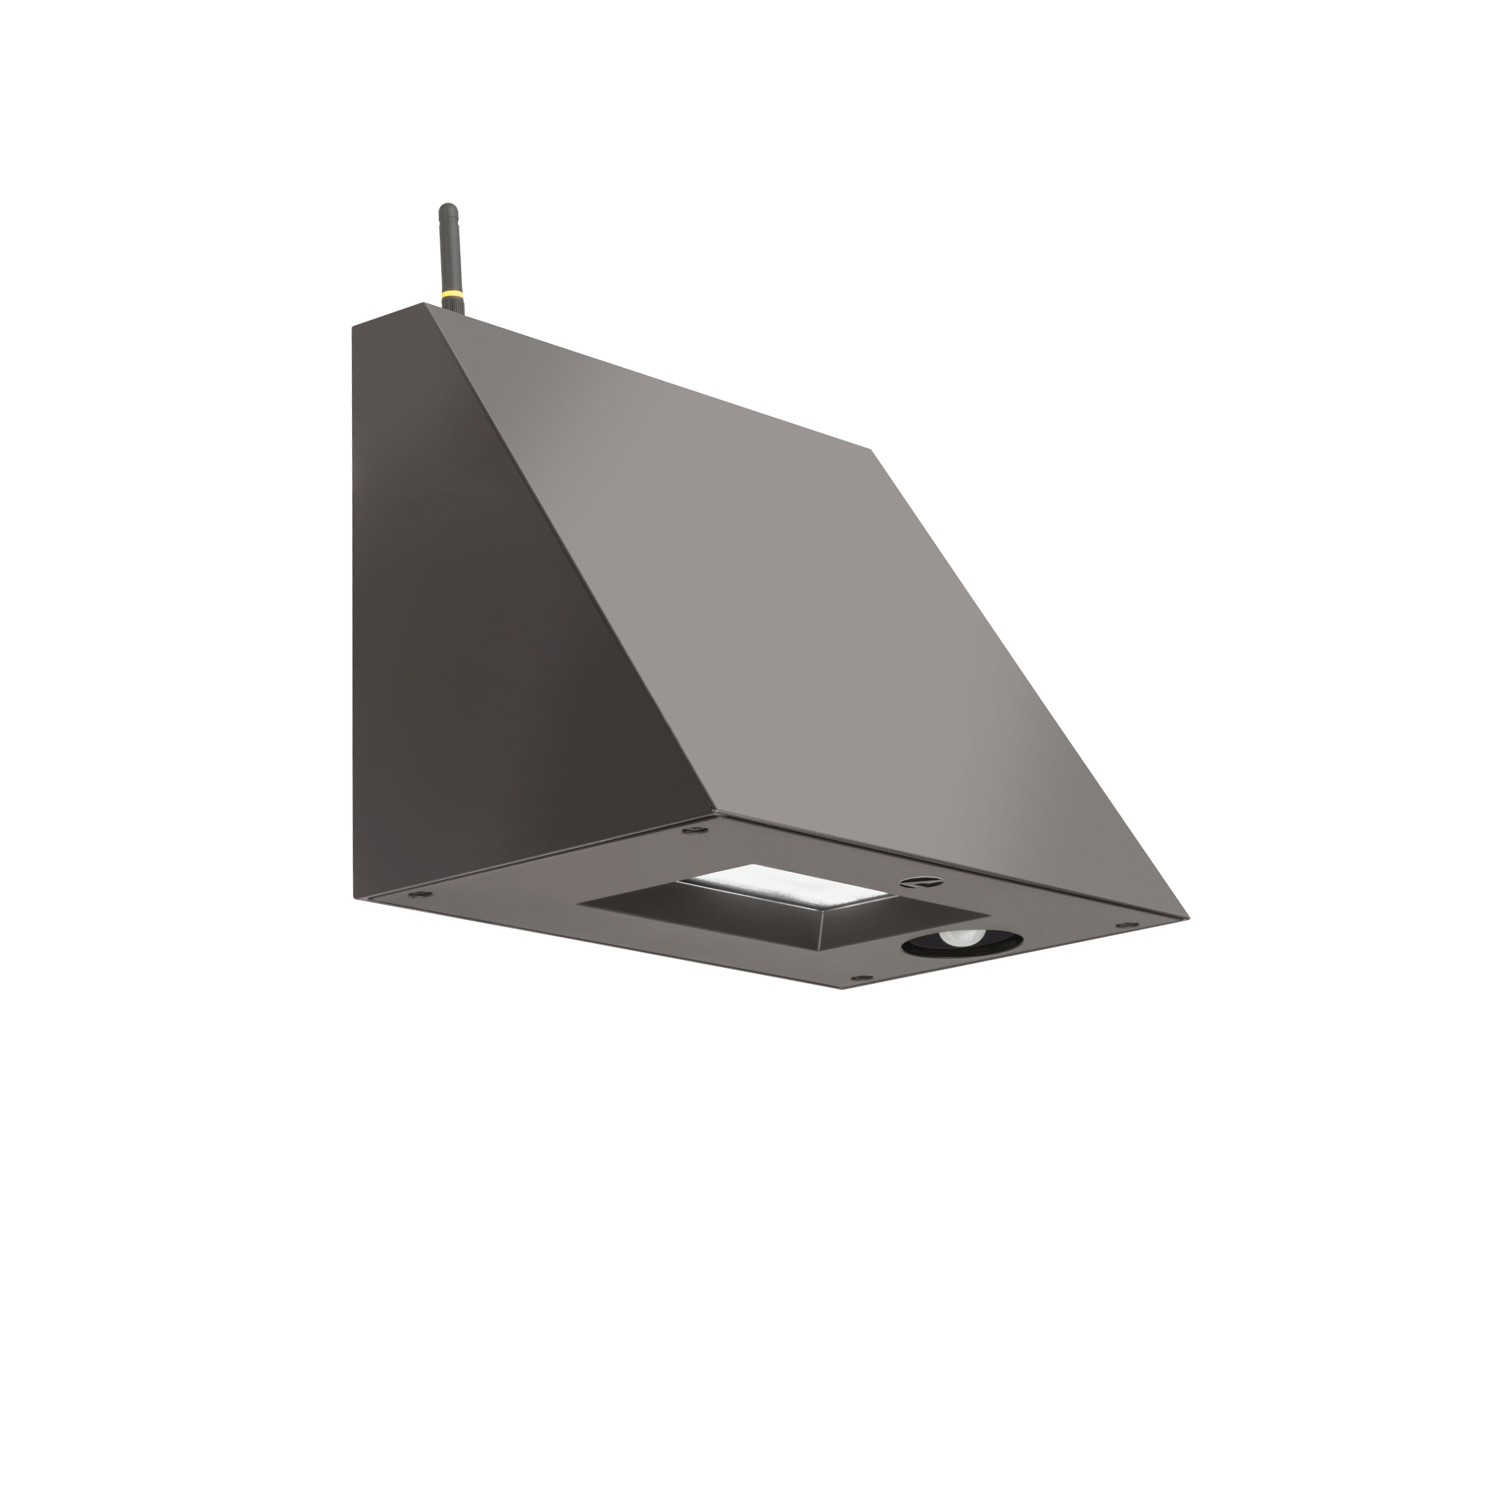 Wdge2 Led Wall Mount Architectural Wall Luminaire Size 2 Up To 6 000 Lumens